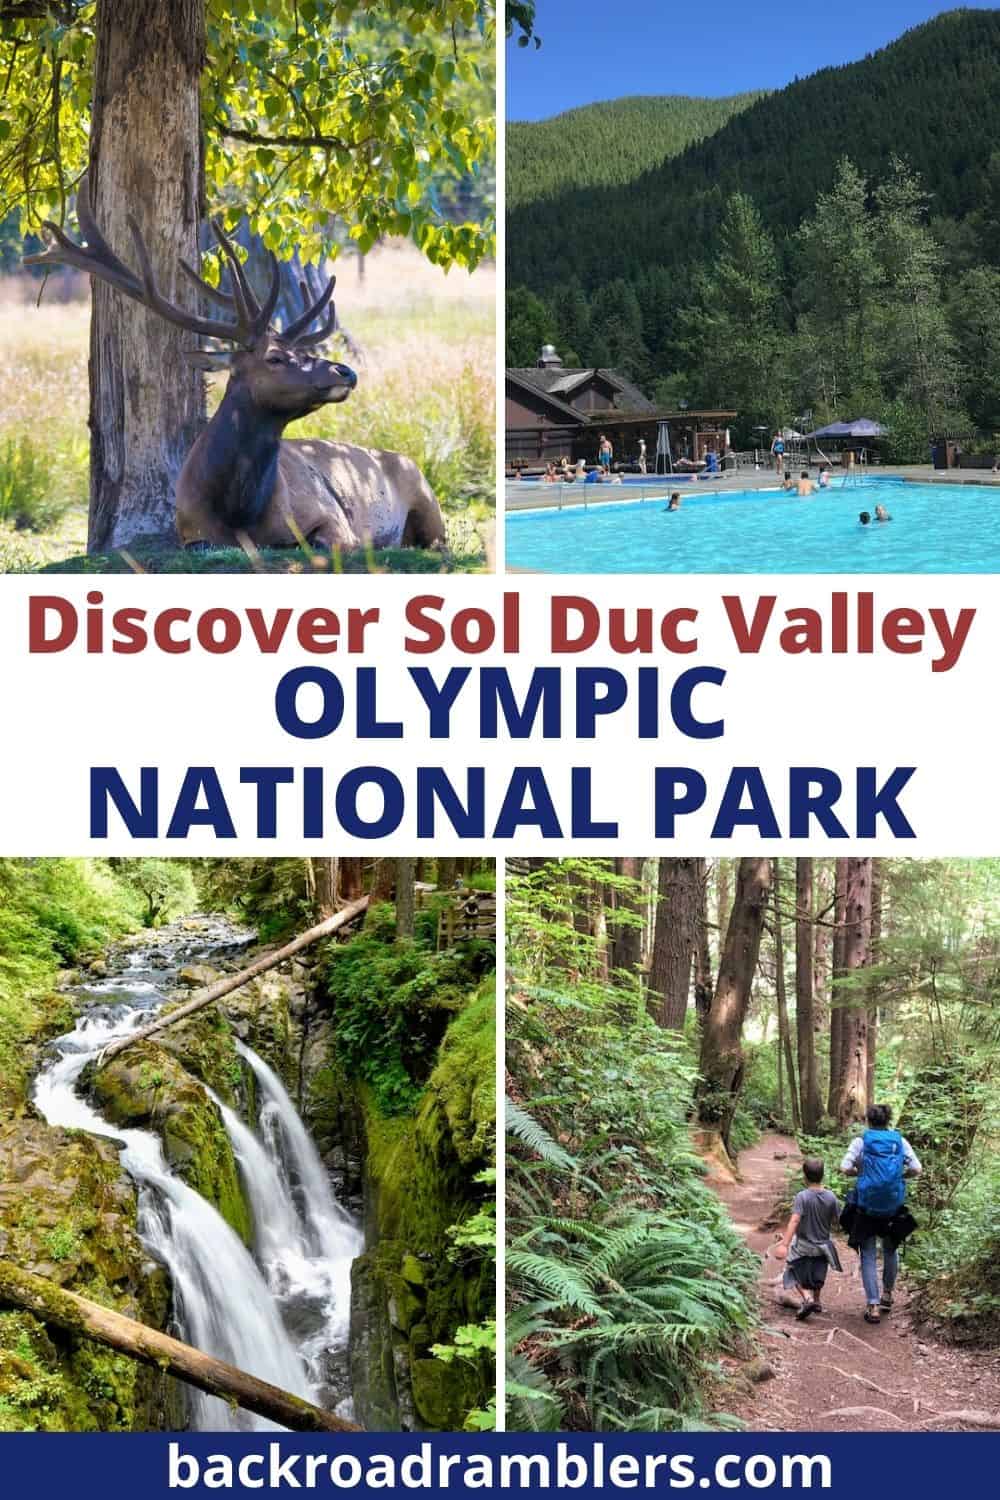 A collage of photos featuring the Sol Duc Valley in Olympic National Park - a Roosevelt Elk, Sol Duc Hot Springs, Sol Duc Falls, and a Sol Duc hiking trail.